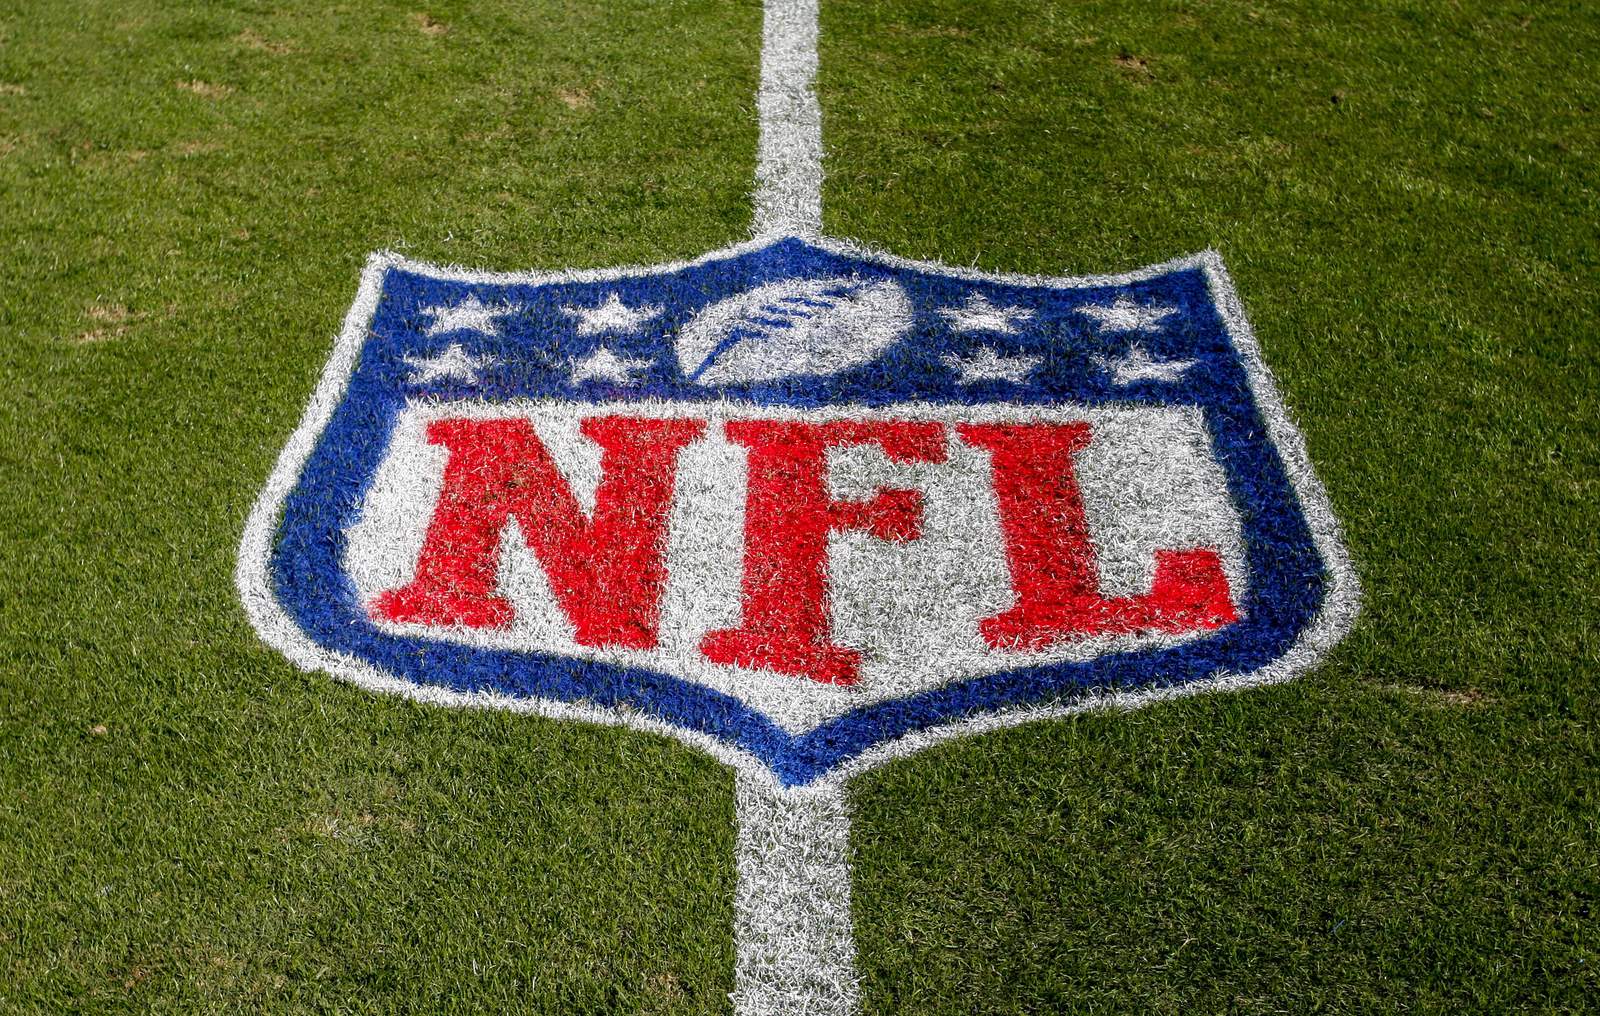 NFL to prohibit in-person team activities Monday and Tuesday